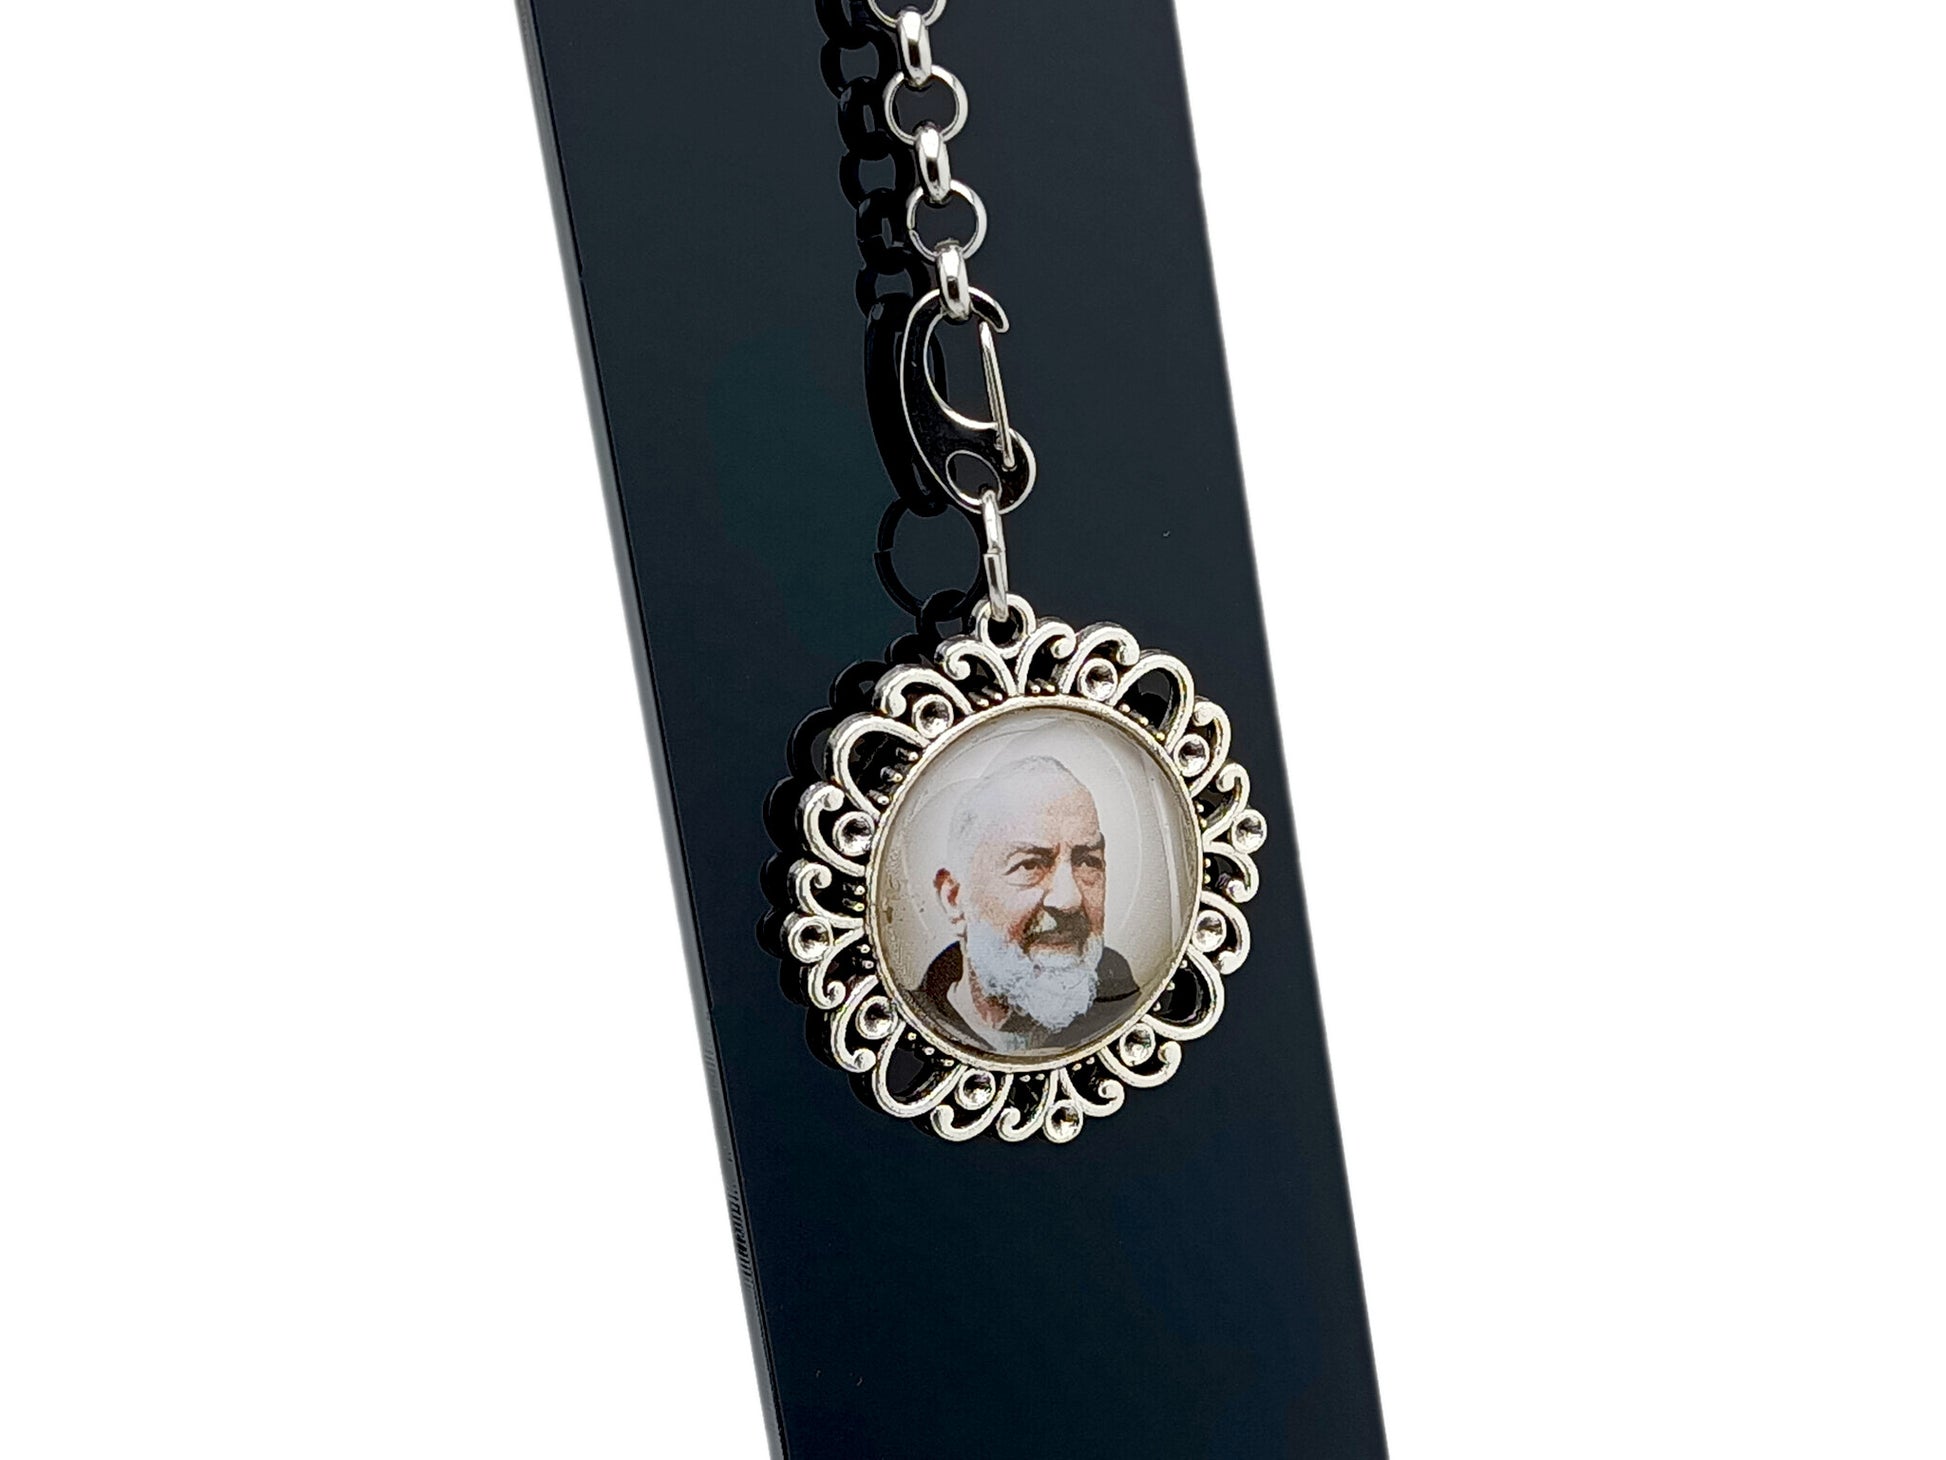 Padre Pio unique rosary beads purse clip key chain with stainless steel lobster clasp.